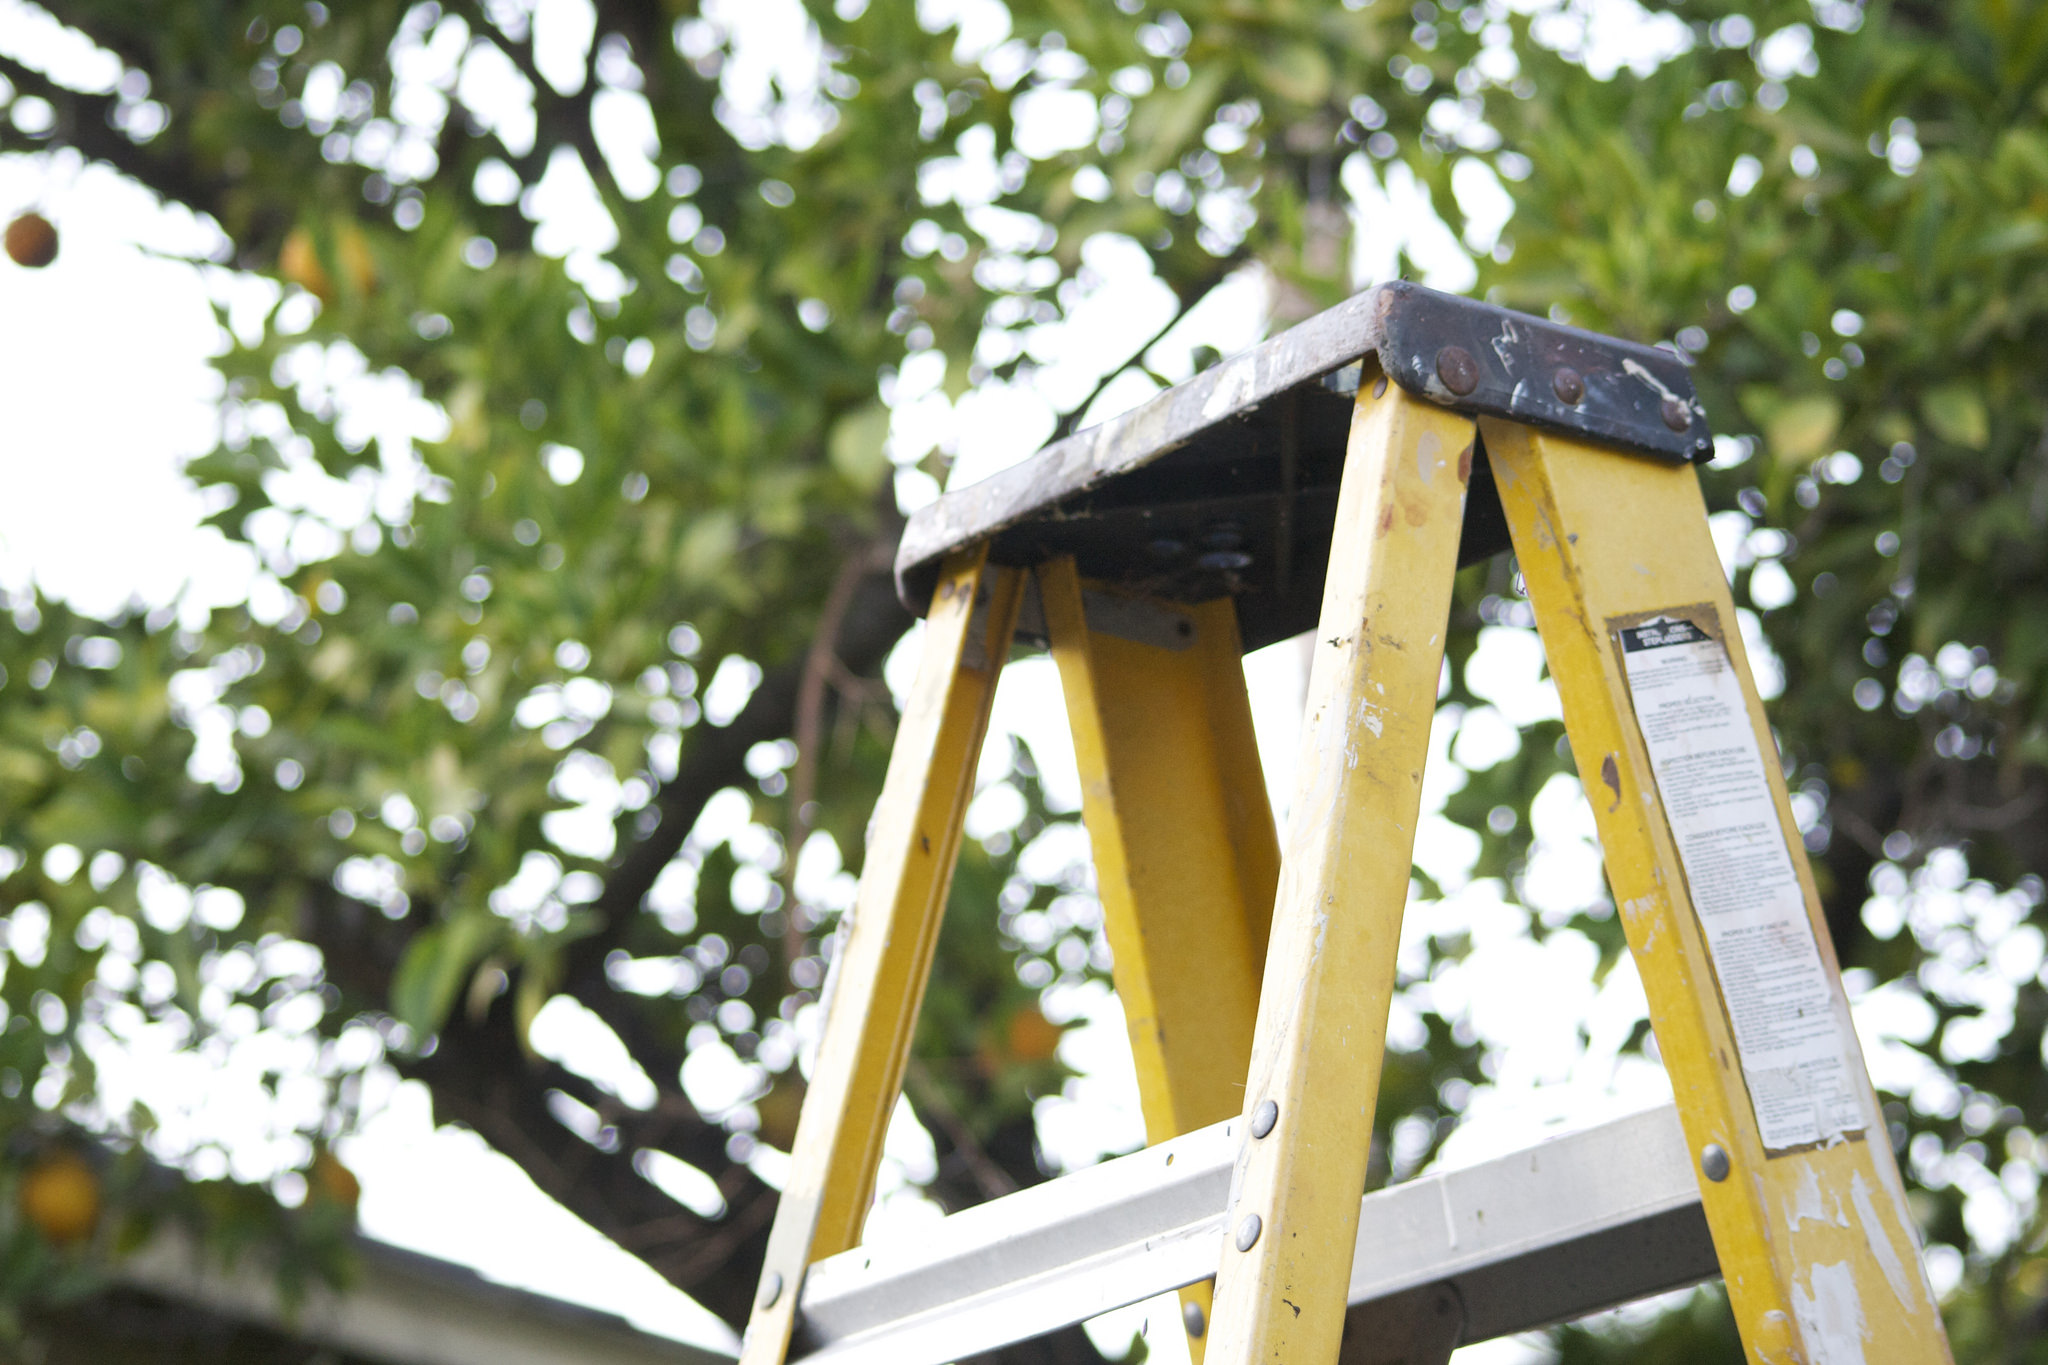 How To Use Ladders Safely When Doing DIY